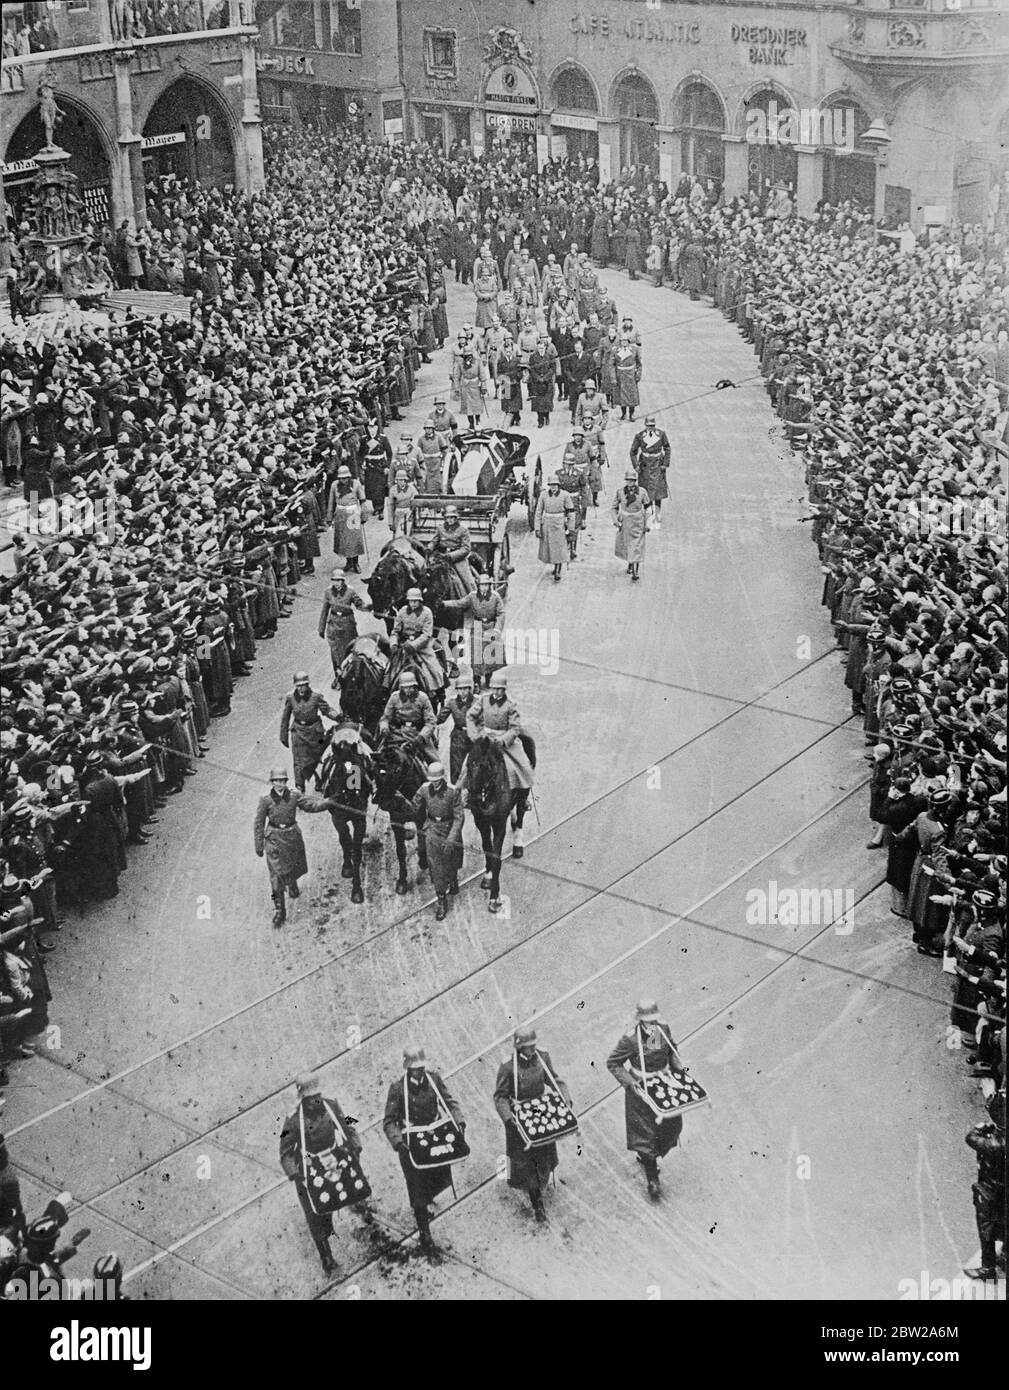 Military funeral of General Ludendorff in Munich. The military funeral procession of General Erich Ludendorff, famous German army commander, past three Munich from the Victory Gate to the Feldherrnhalle, where the funeral oration was delivered by Field Marshal von Bromberg, the War Minister. The coffin was then taken on the gun carriage to the centre of the city, where it was transferred to a motor hearse and driven to Tutzing, the general's home village for burial. Chancellor Hitler and other Government members walked in the procession. Photo shows, the cortege passing through the crowd lined Stock Photo